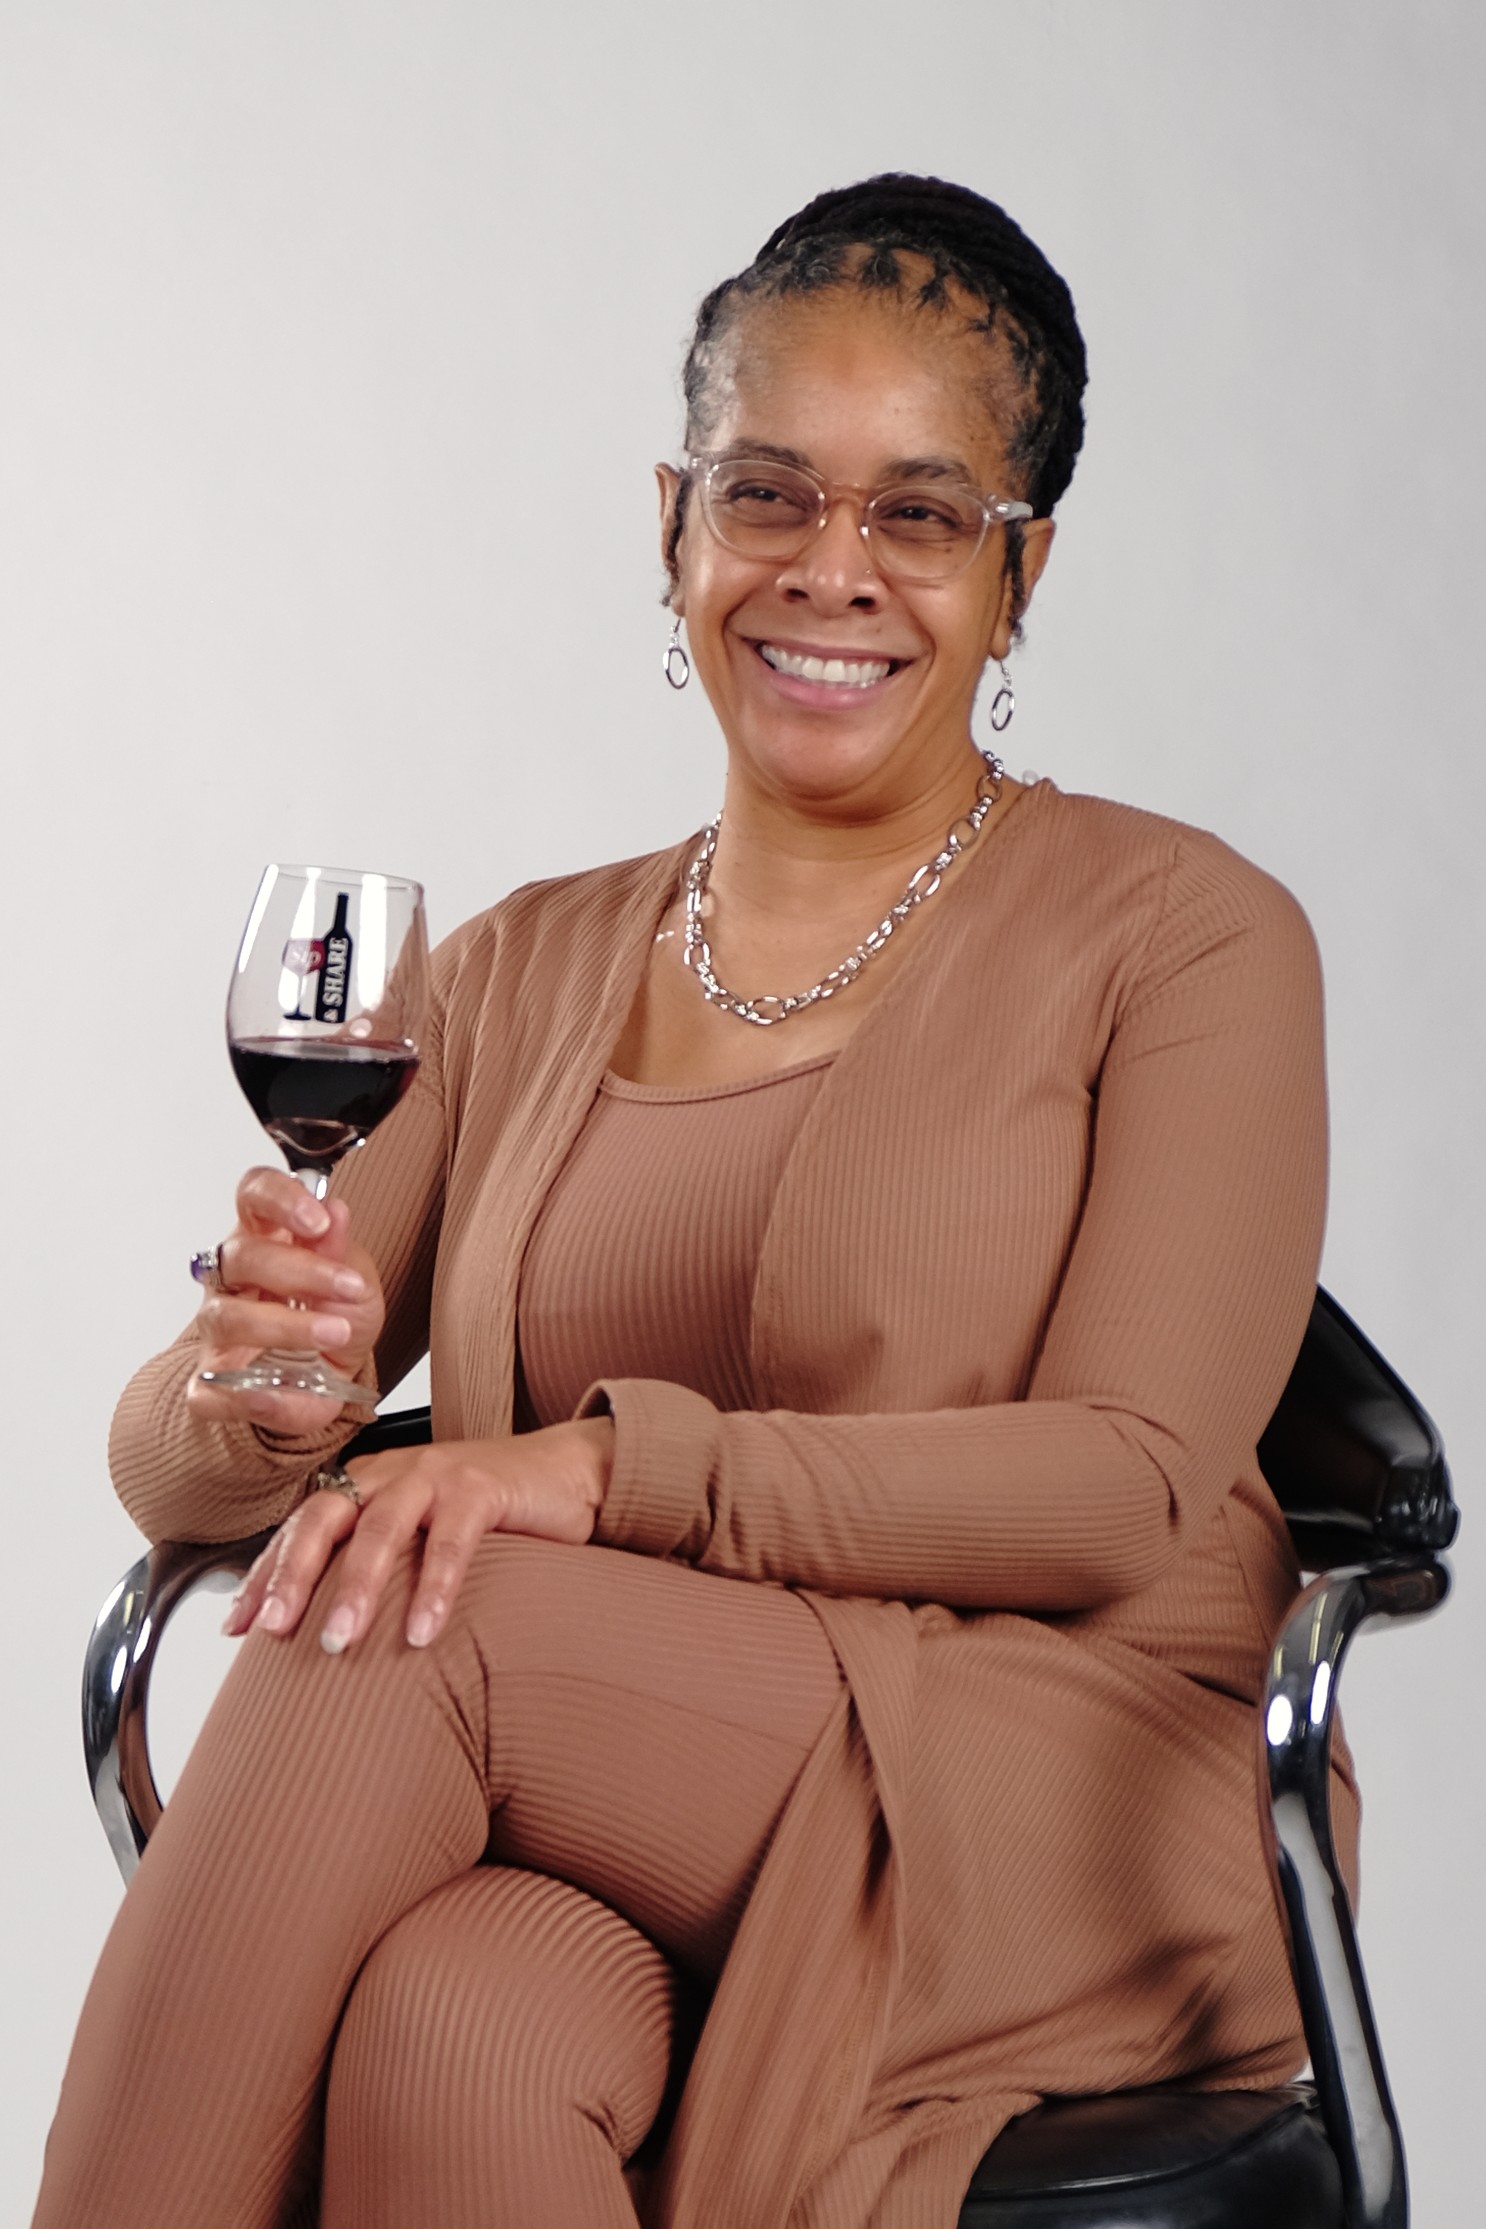 Nicole Kearney poses while holding a glass of red wine.